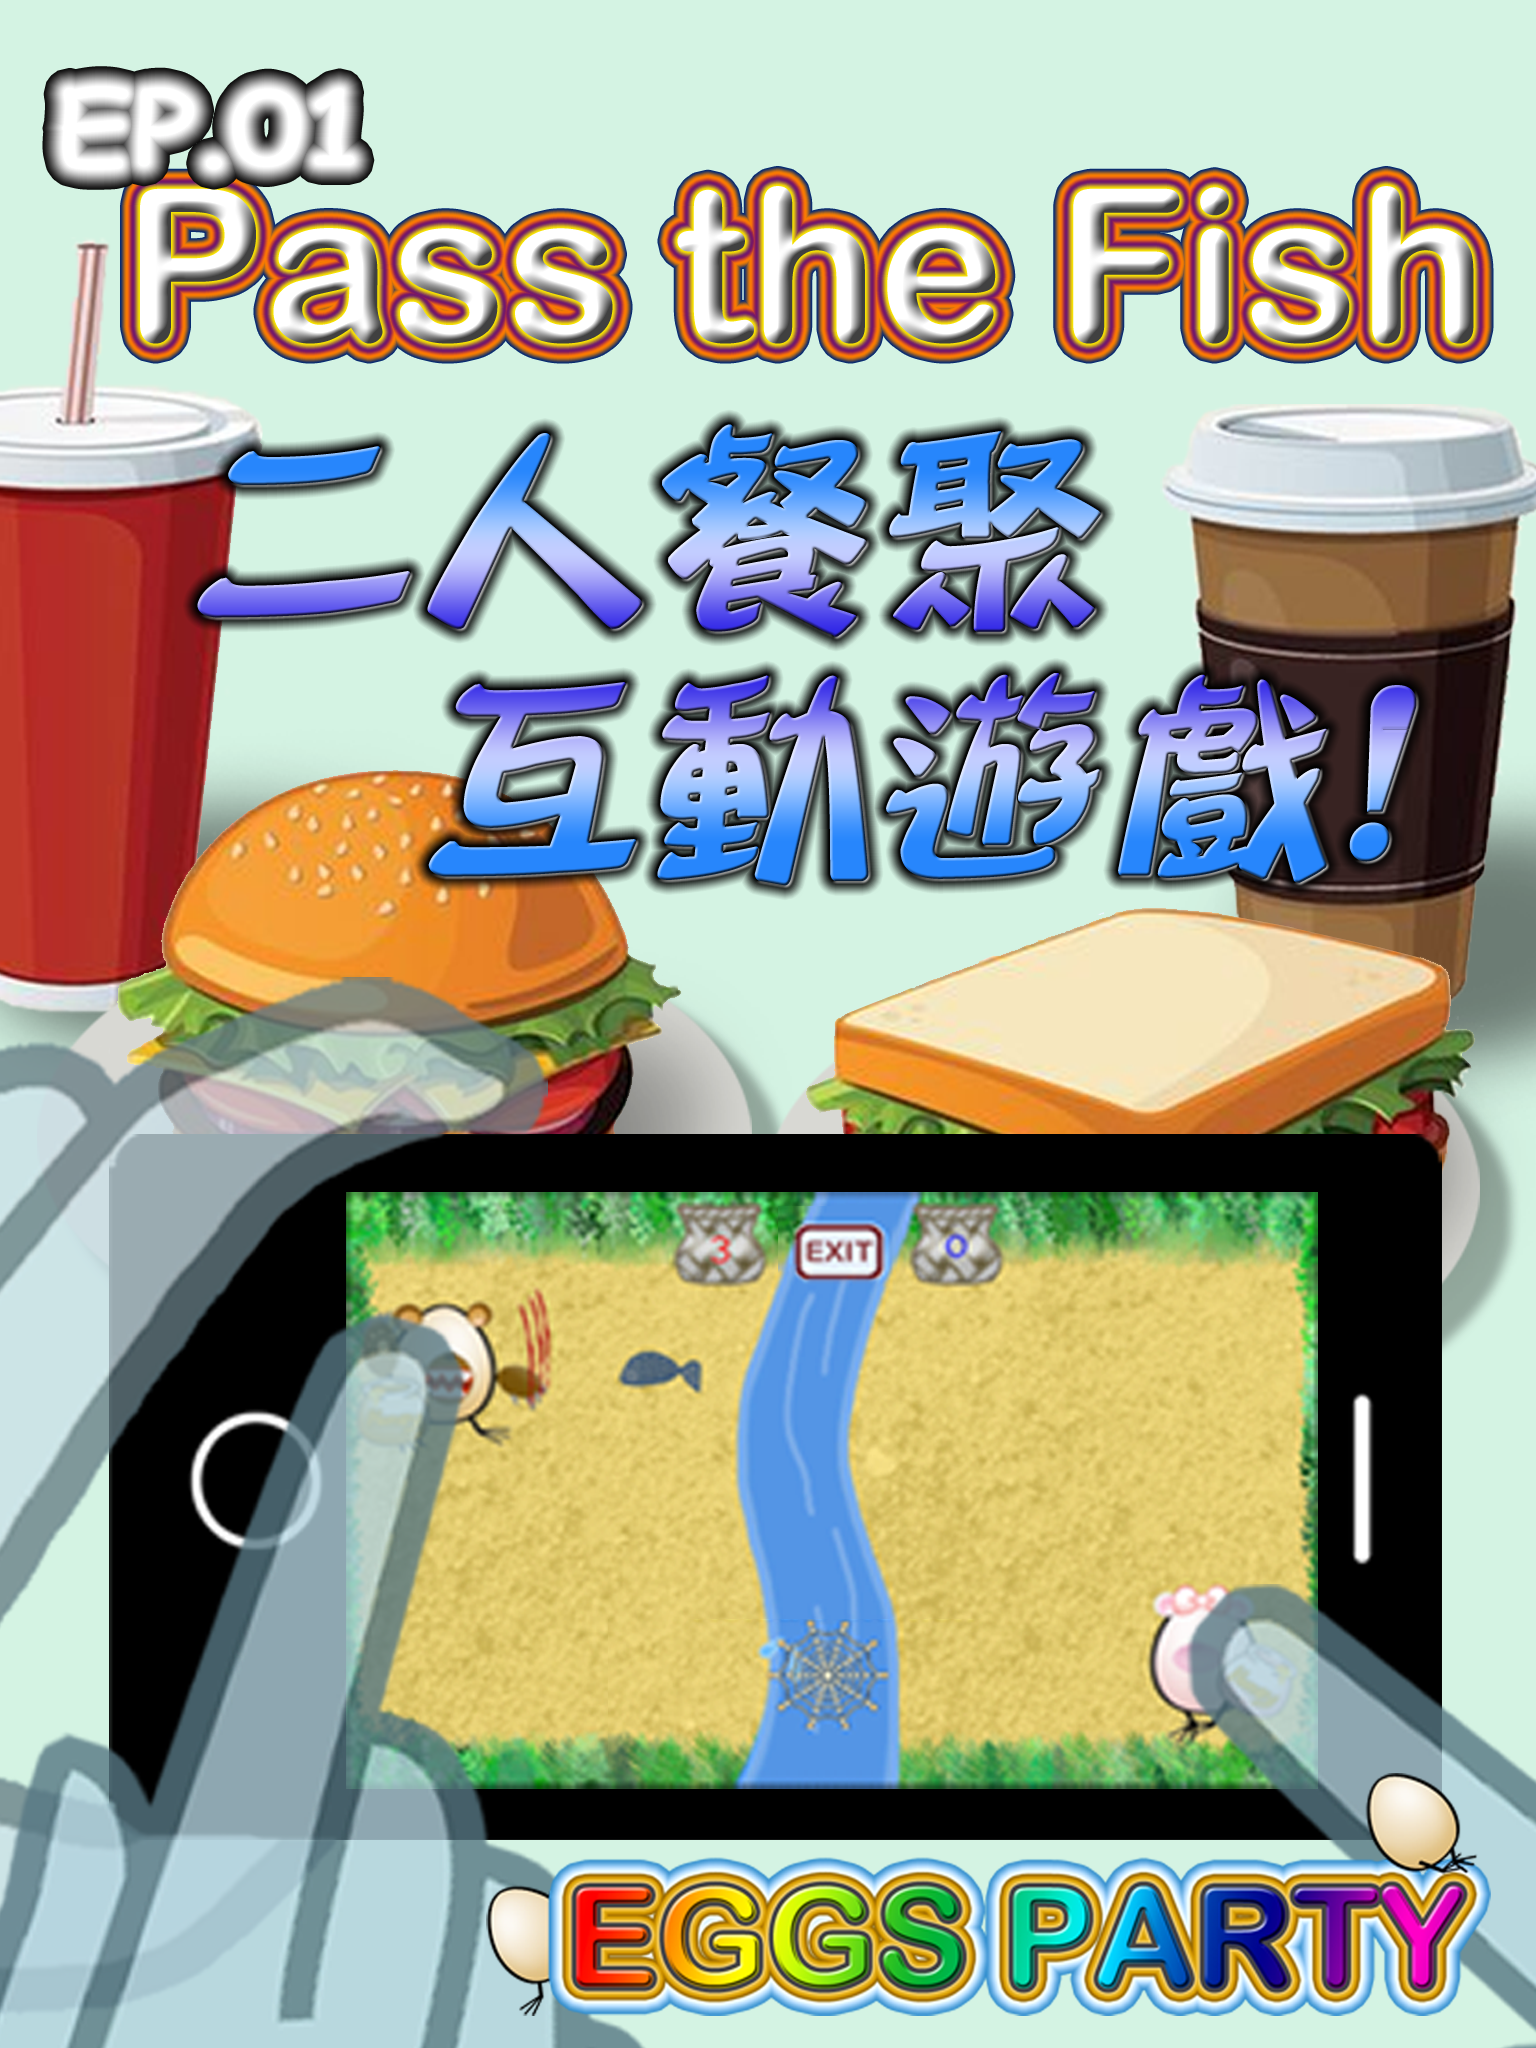 Screenshot 1 of Eggs Party ep1: Pass The Fish 2.1